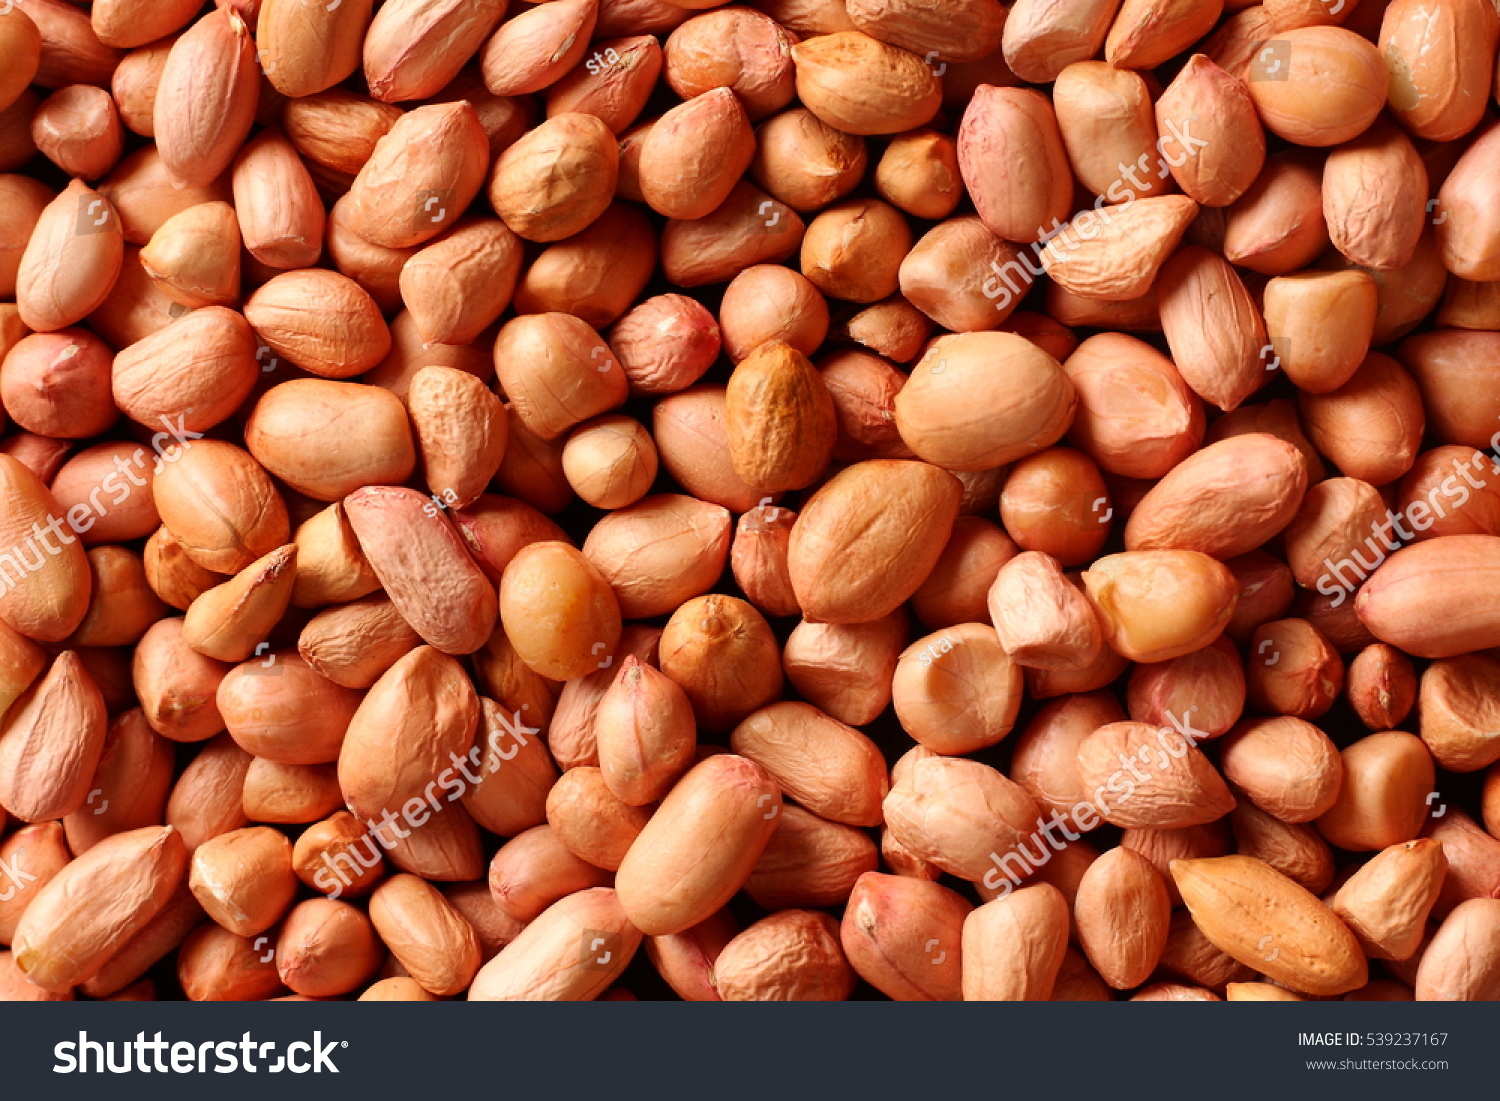 46,631 Ground Nuts Images, Stock Photos & Vectors | Shutterstock